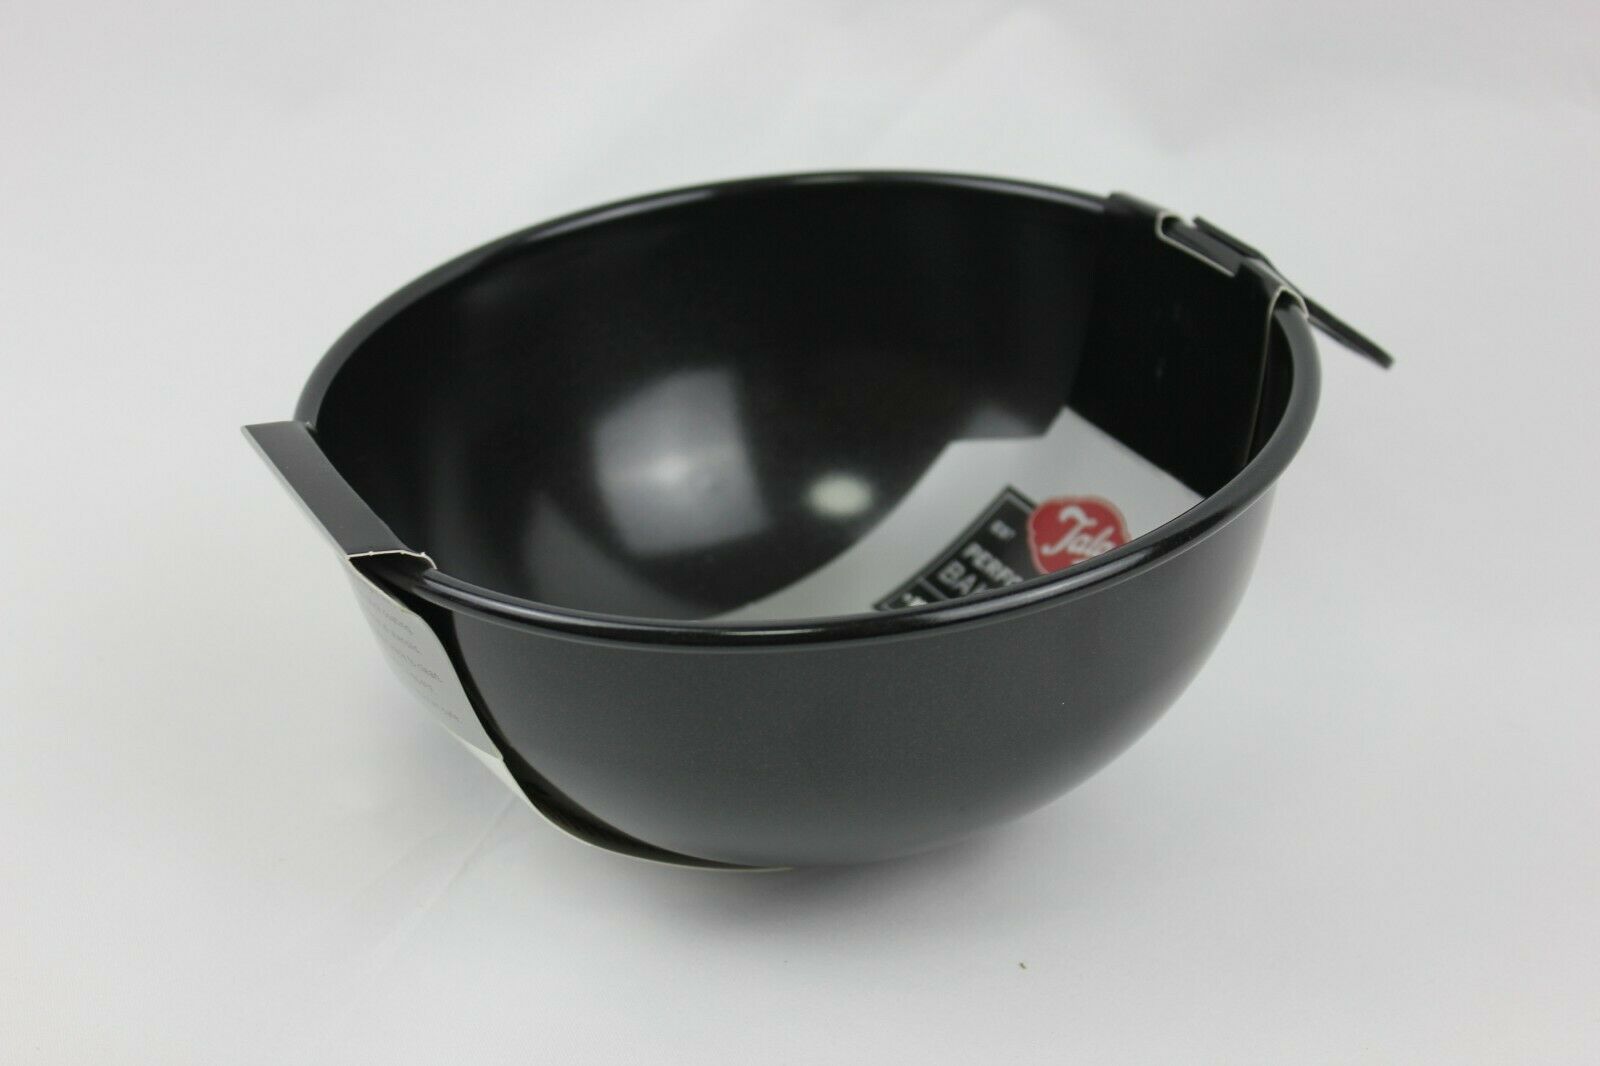 attachment-https://www.cupcakeaddicts.co.uk/wp-content/uploads/imported/2/Tala-Performance-Bakeware-Sphere-Round-Foot-Ball-Soccer-Non-Stick-Cake-Tin-18-cm-324484379432-3.jpg